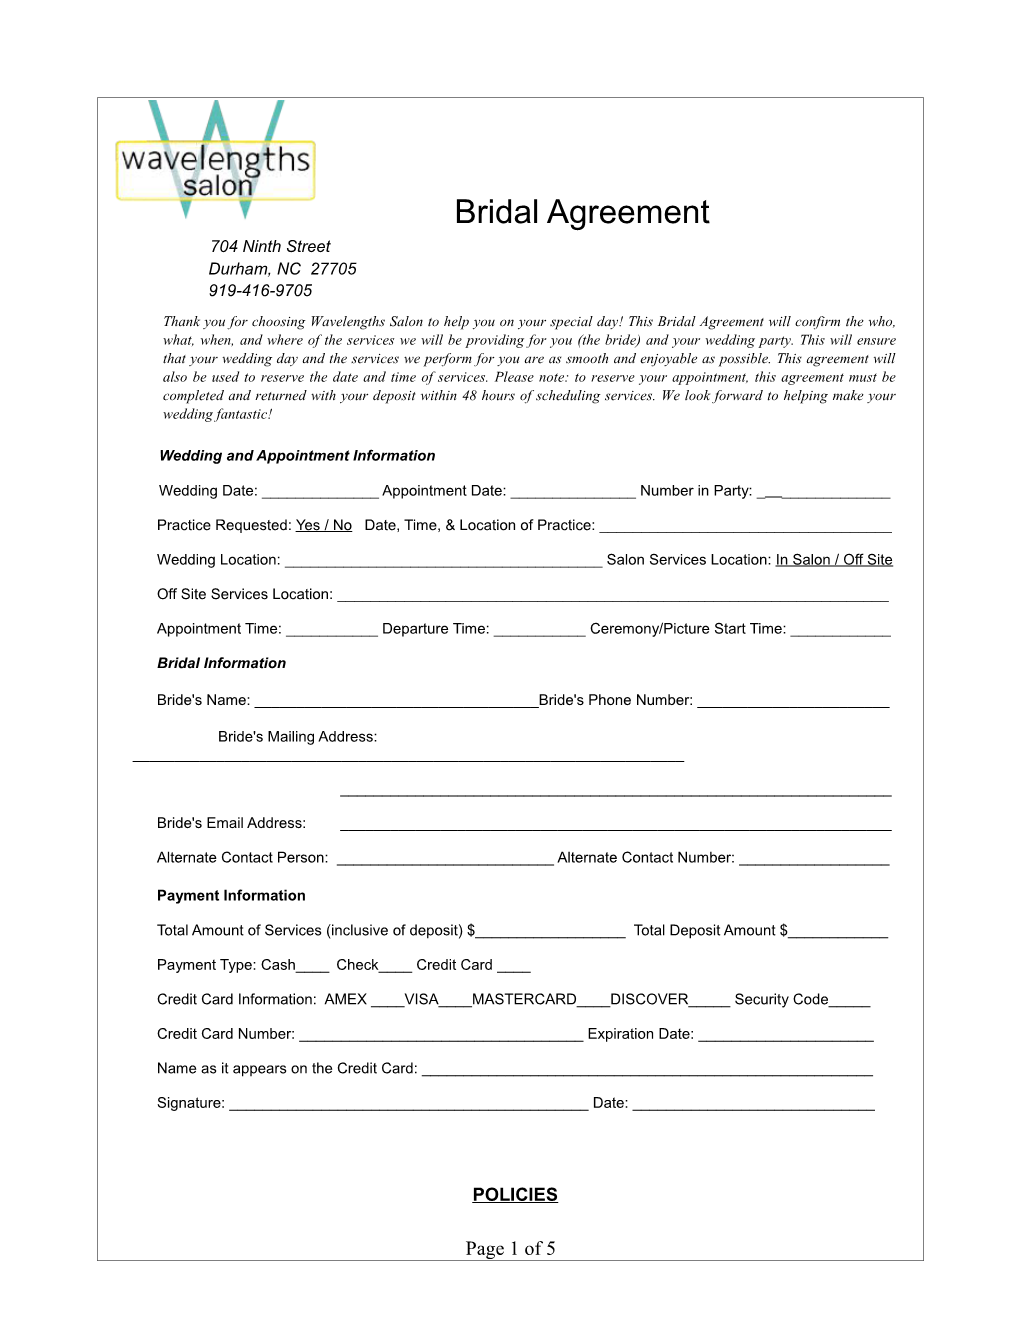 Wedding and Appointment Information